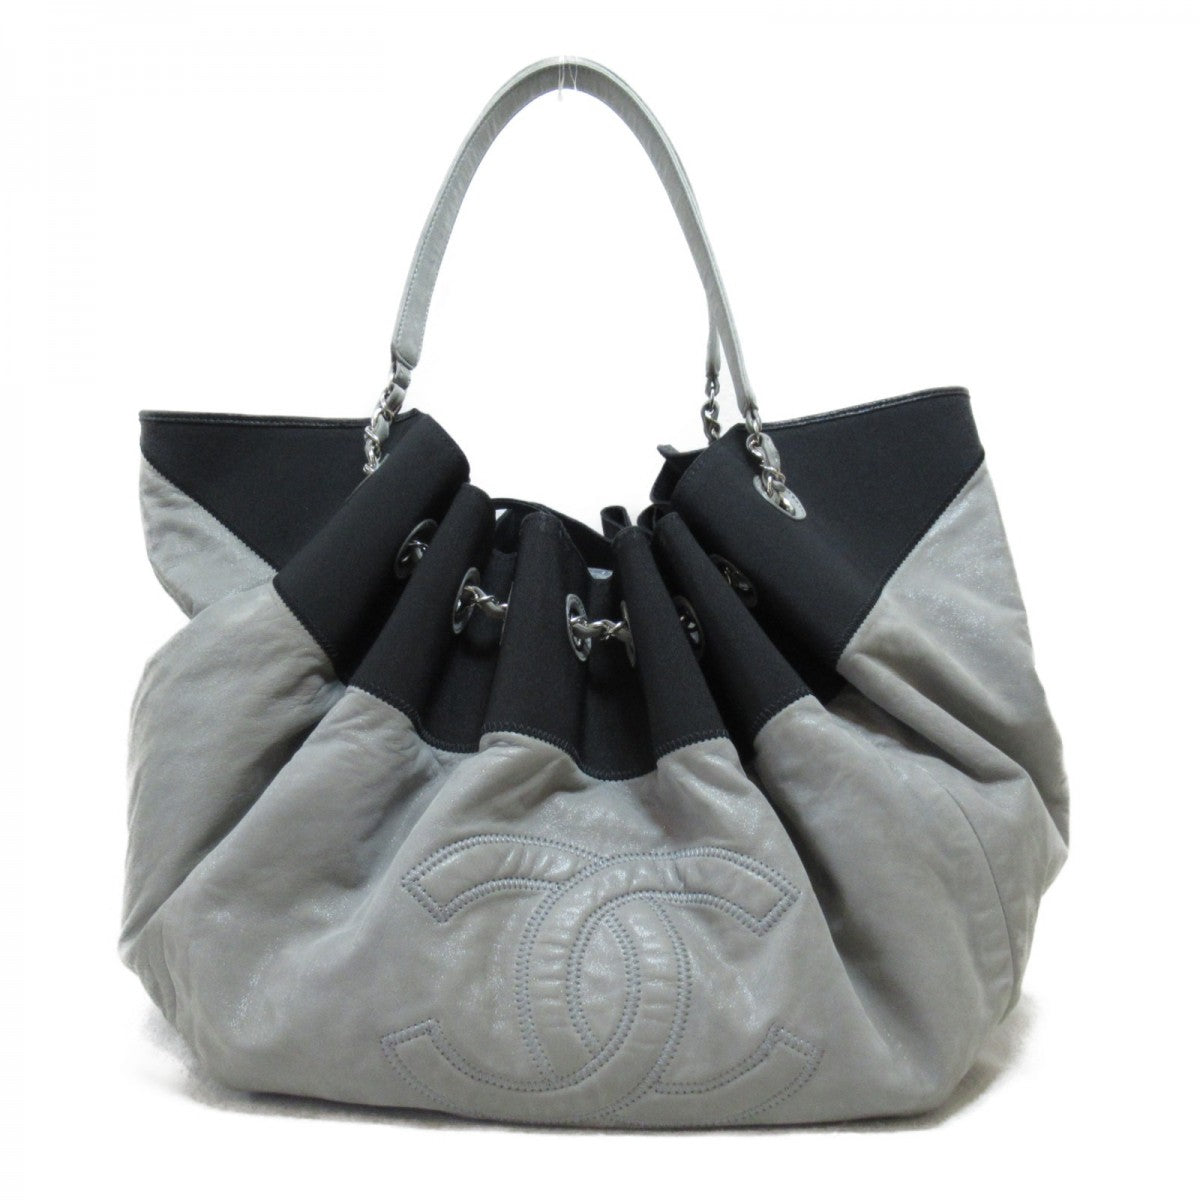 CC Leather and Canvas Tote Bag